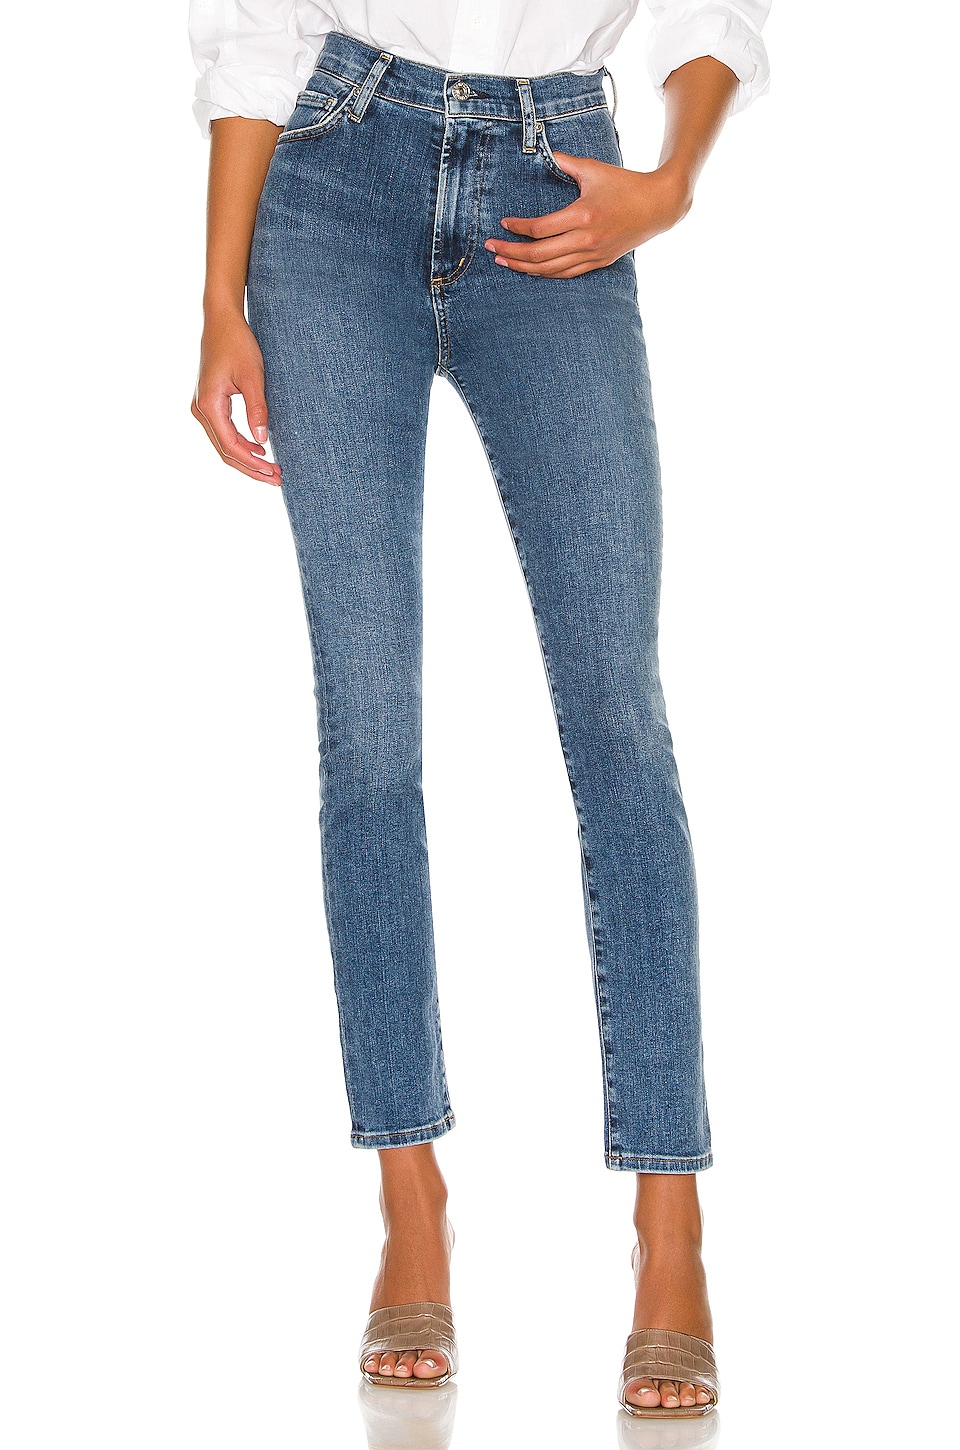 Citizens of Humanity Olivia High Rise Slim in Hightime | REVOLVE